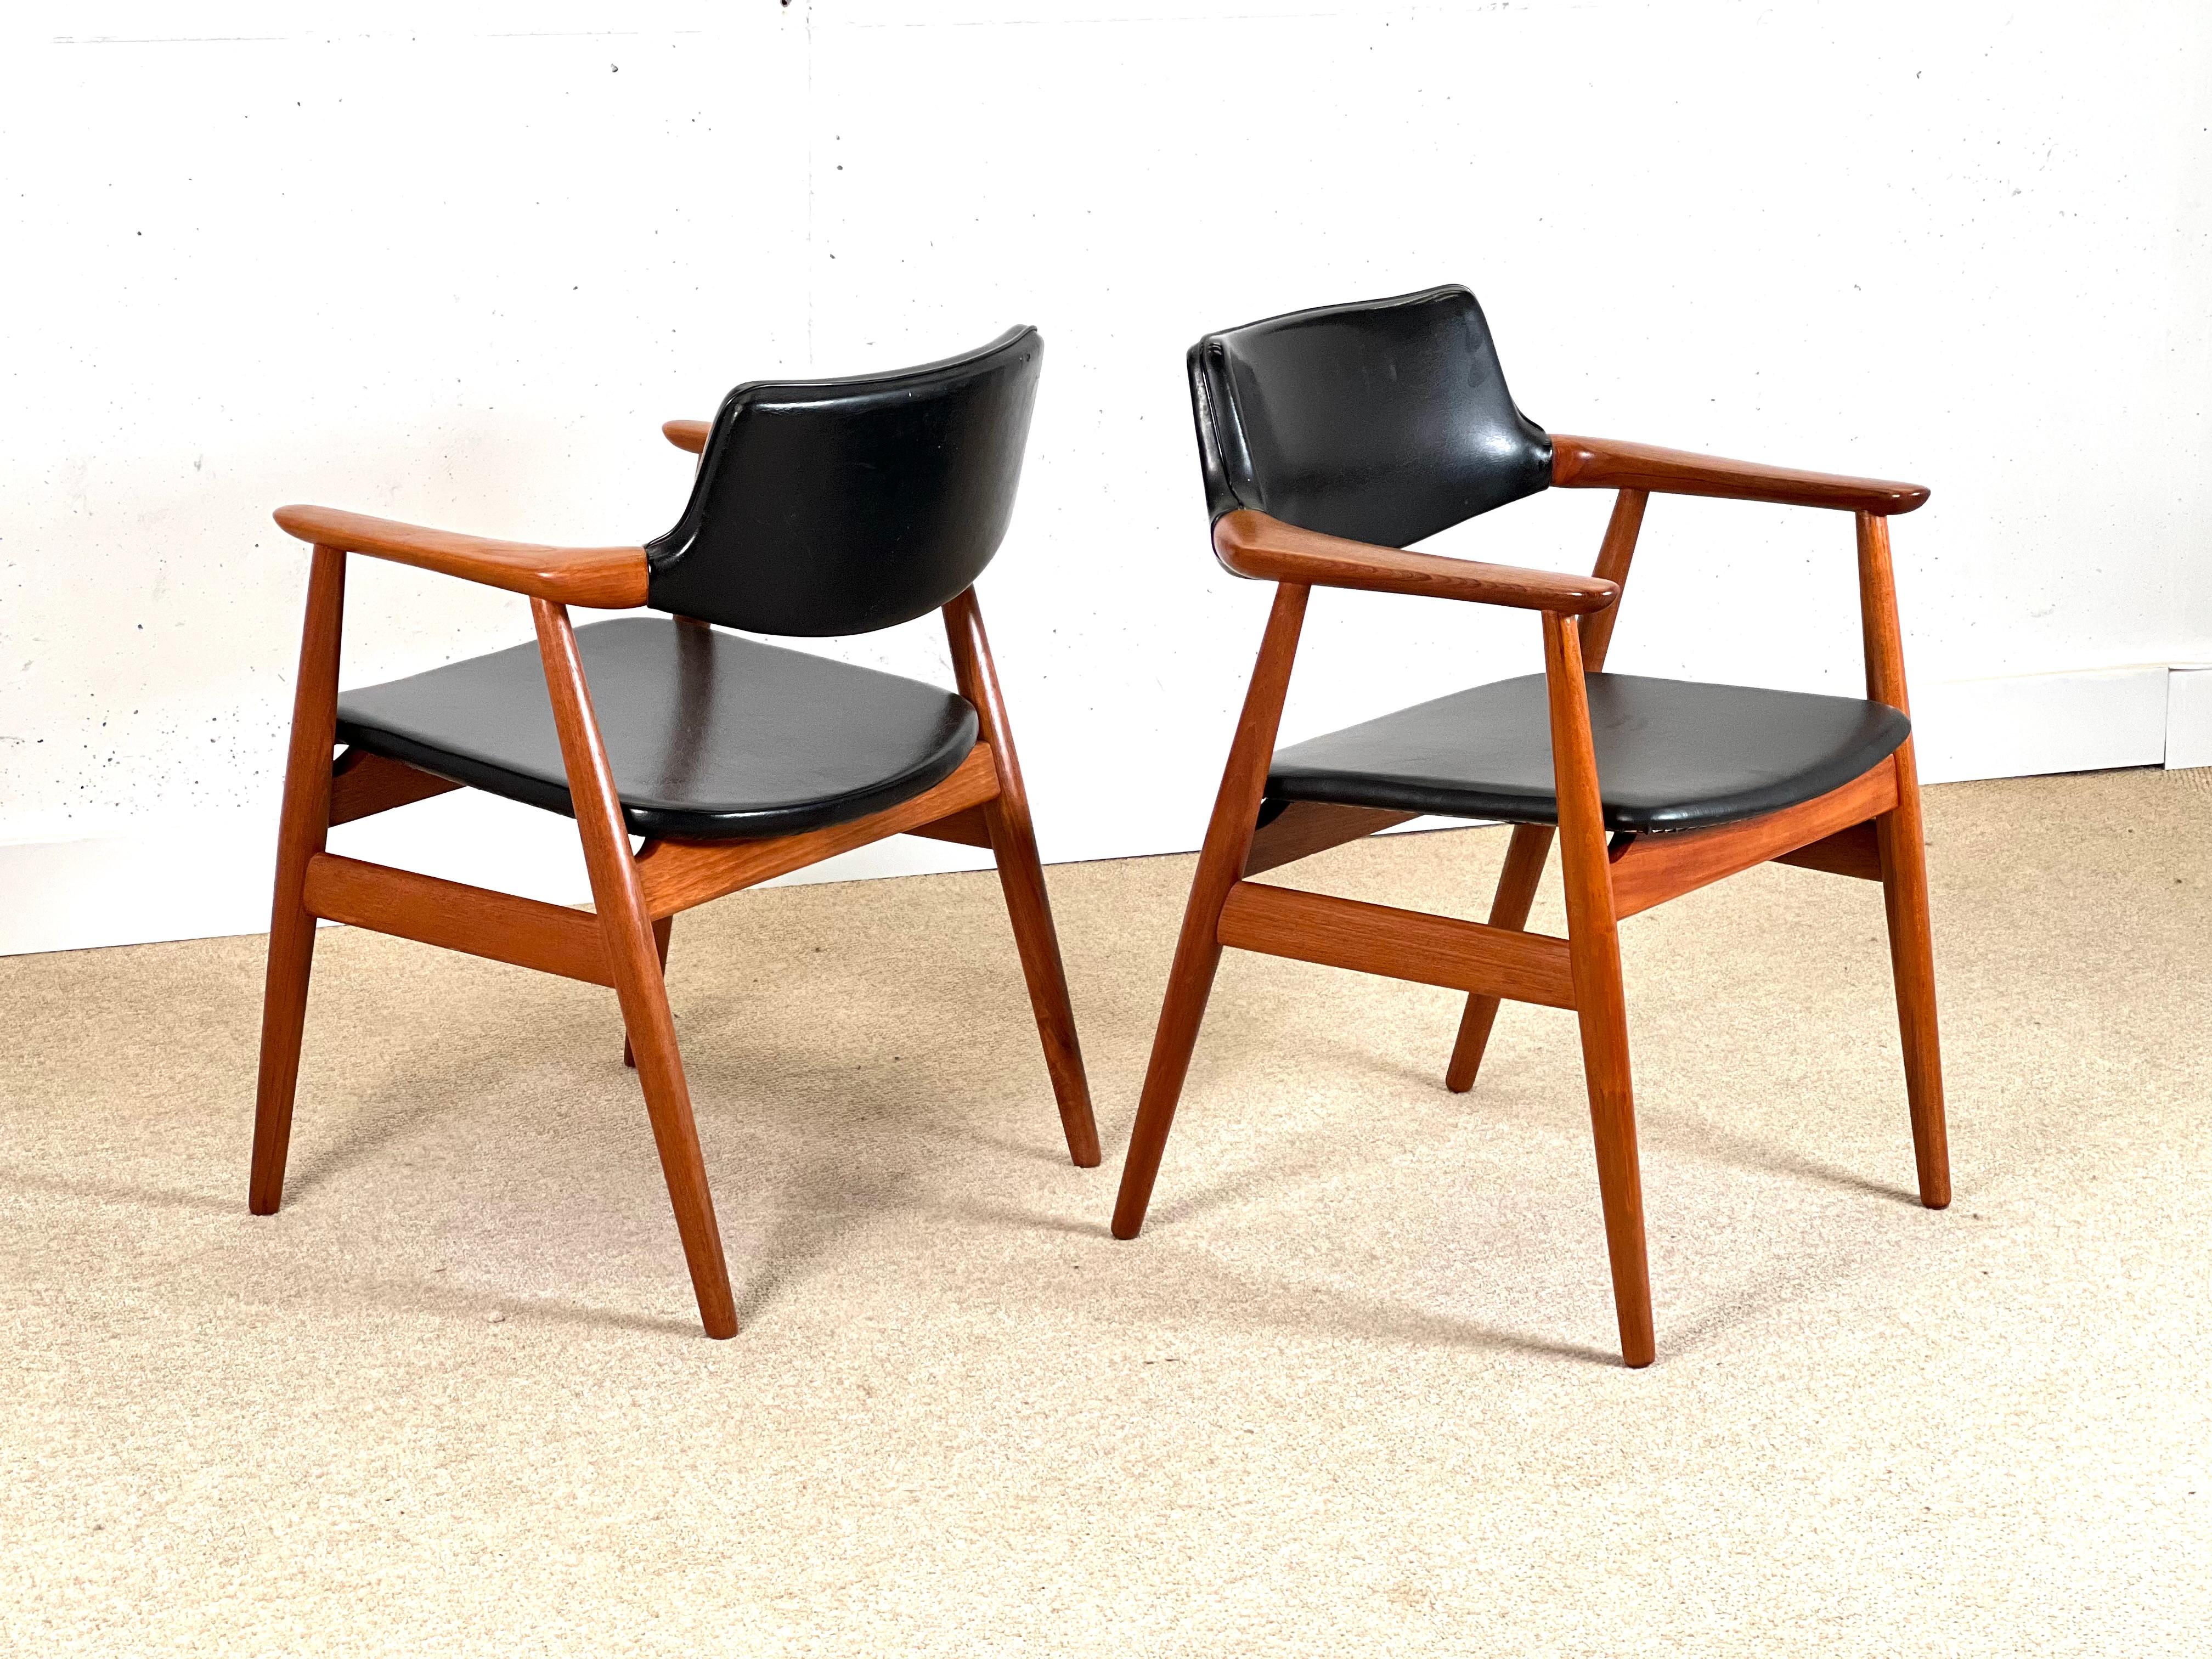 Teak A Set Of Four or six Svend Aage Eriksen Dining Room Chair Model Gm11, 1960 For Sale